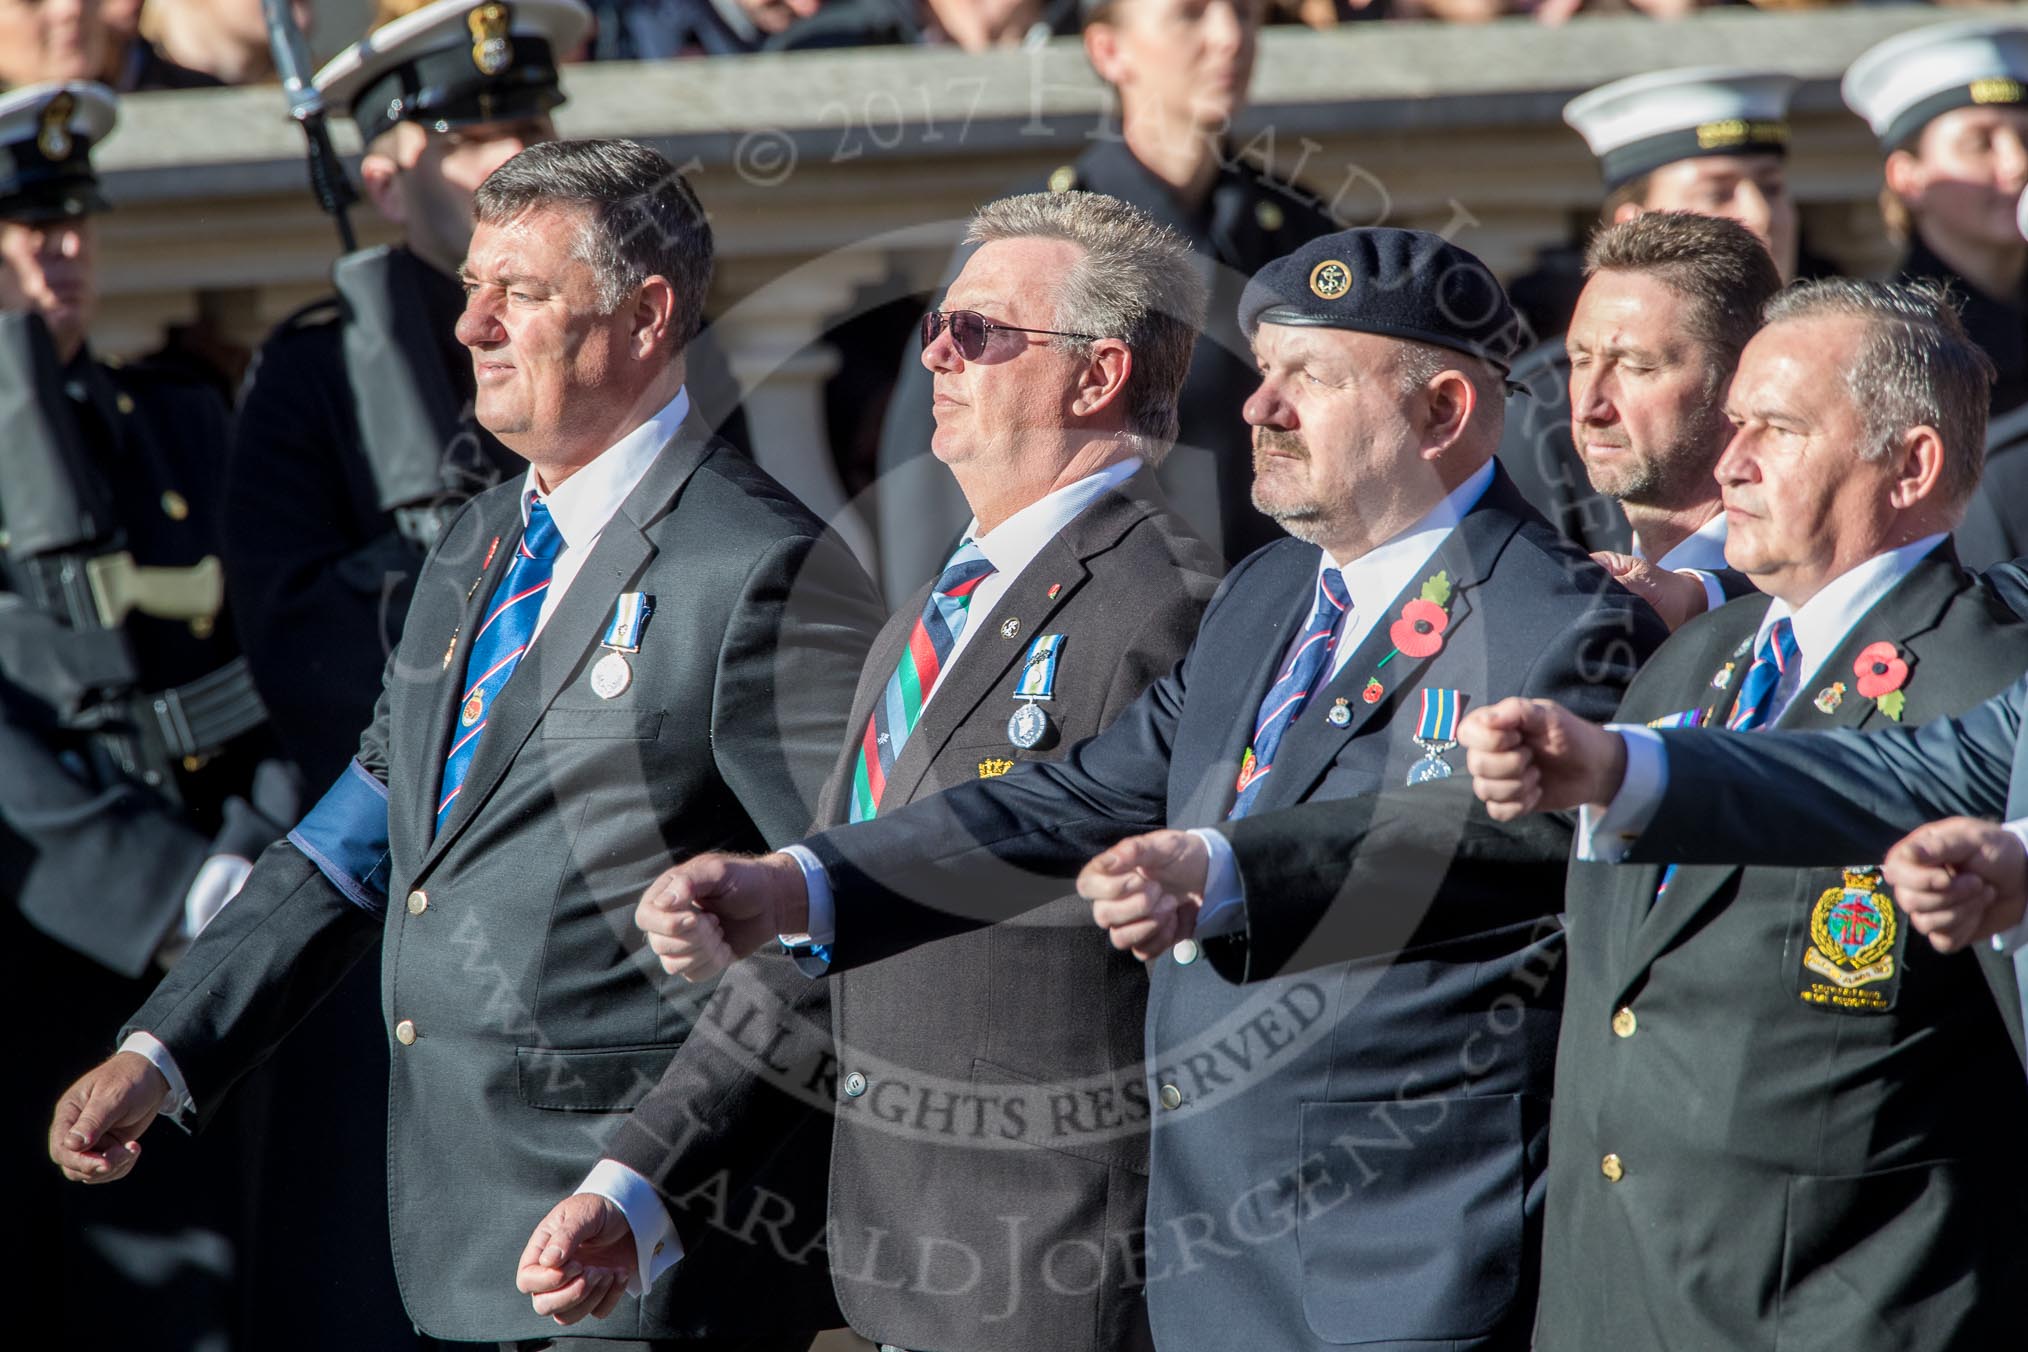 HMS Argonaut Association  (Group E19, 29 members) during the Royal British Legion March Past on Remembrance Sunday at the Cenotaph, Whitehall, Westminster, London, 11 November 2018, 11:44.